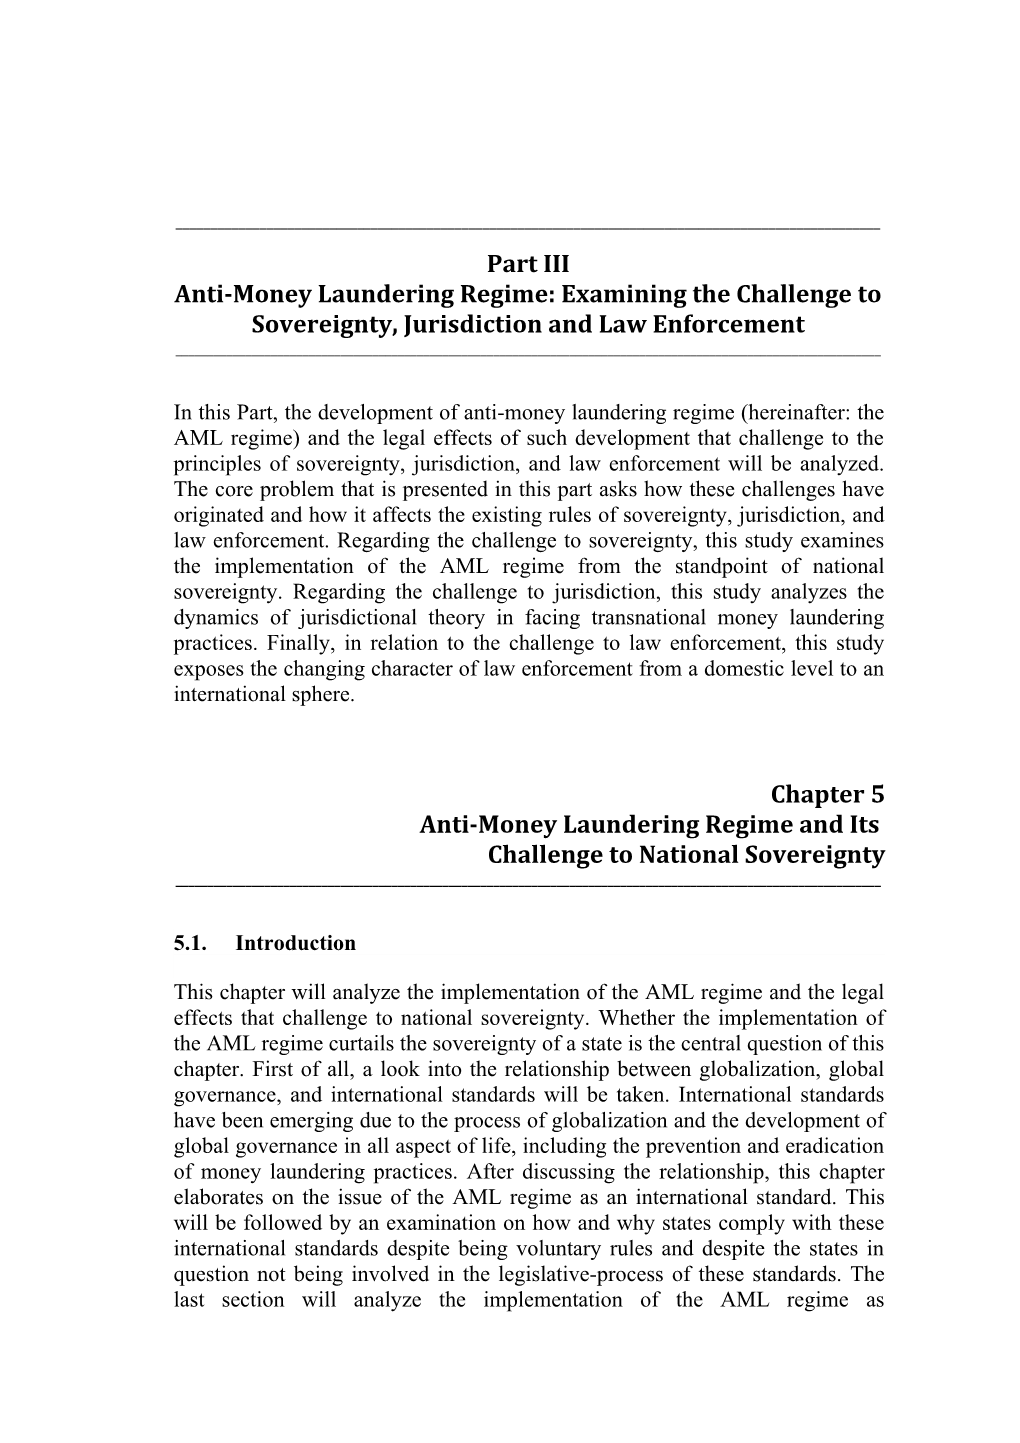 Chapter 5: Anti-Money Laundering Regime and Its Challenge to National Sovereignty 148